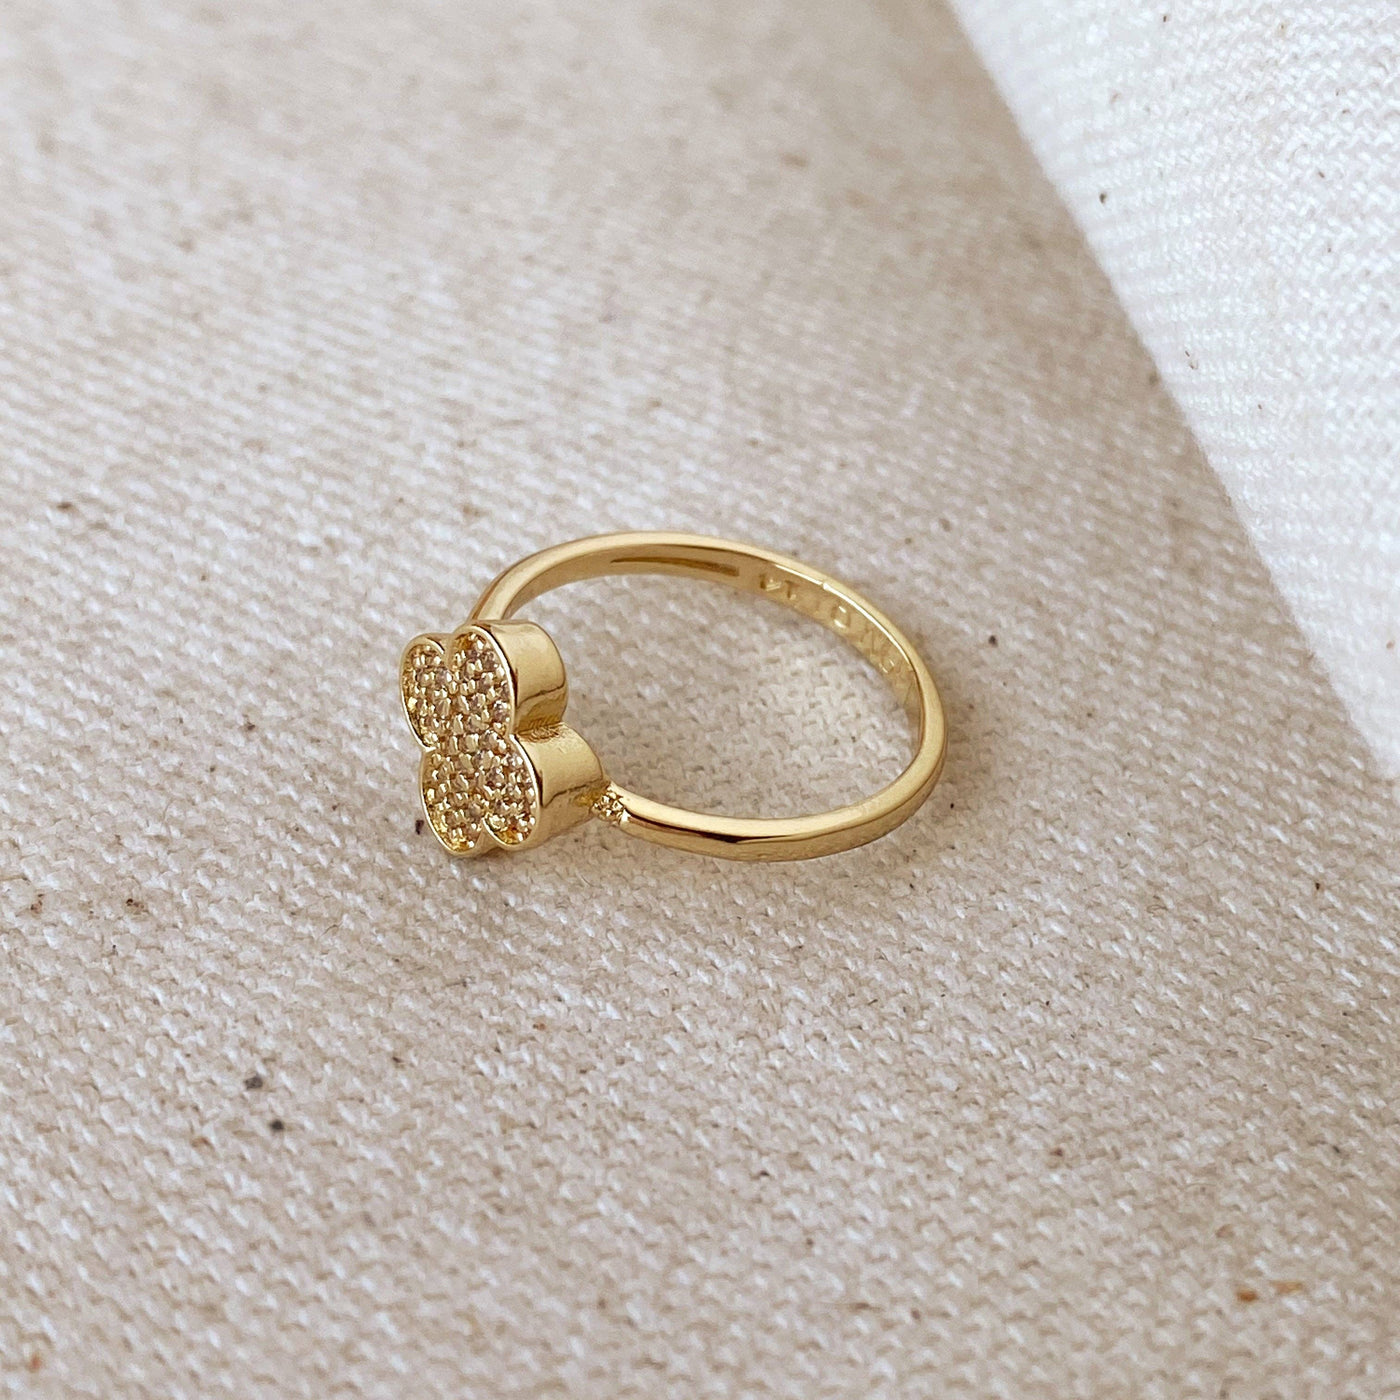 18k Gold Filled Clover Ring With Pave Setting Cubic Zirconia Stone